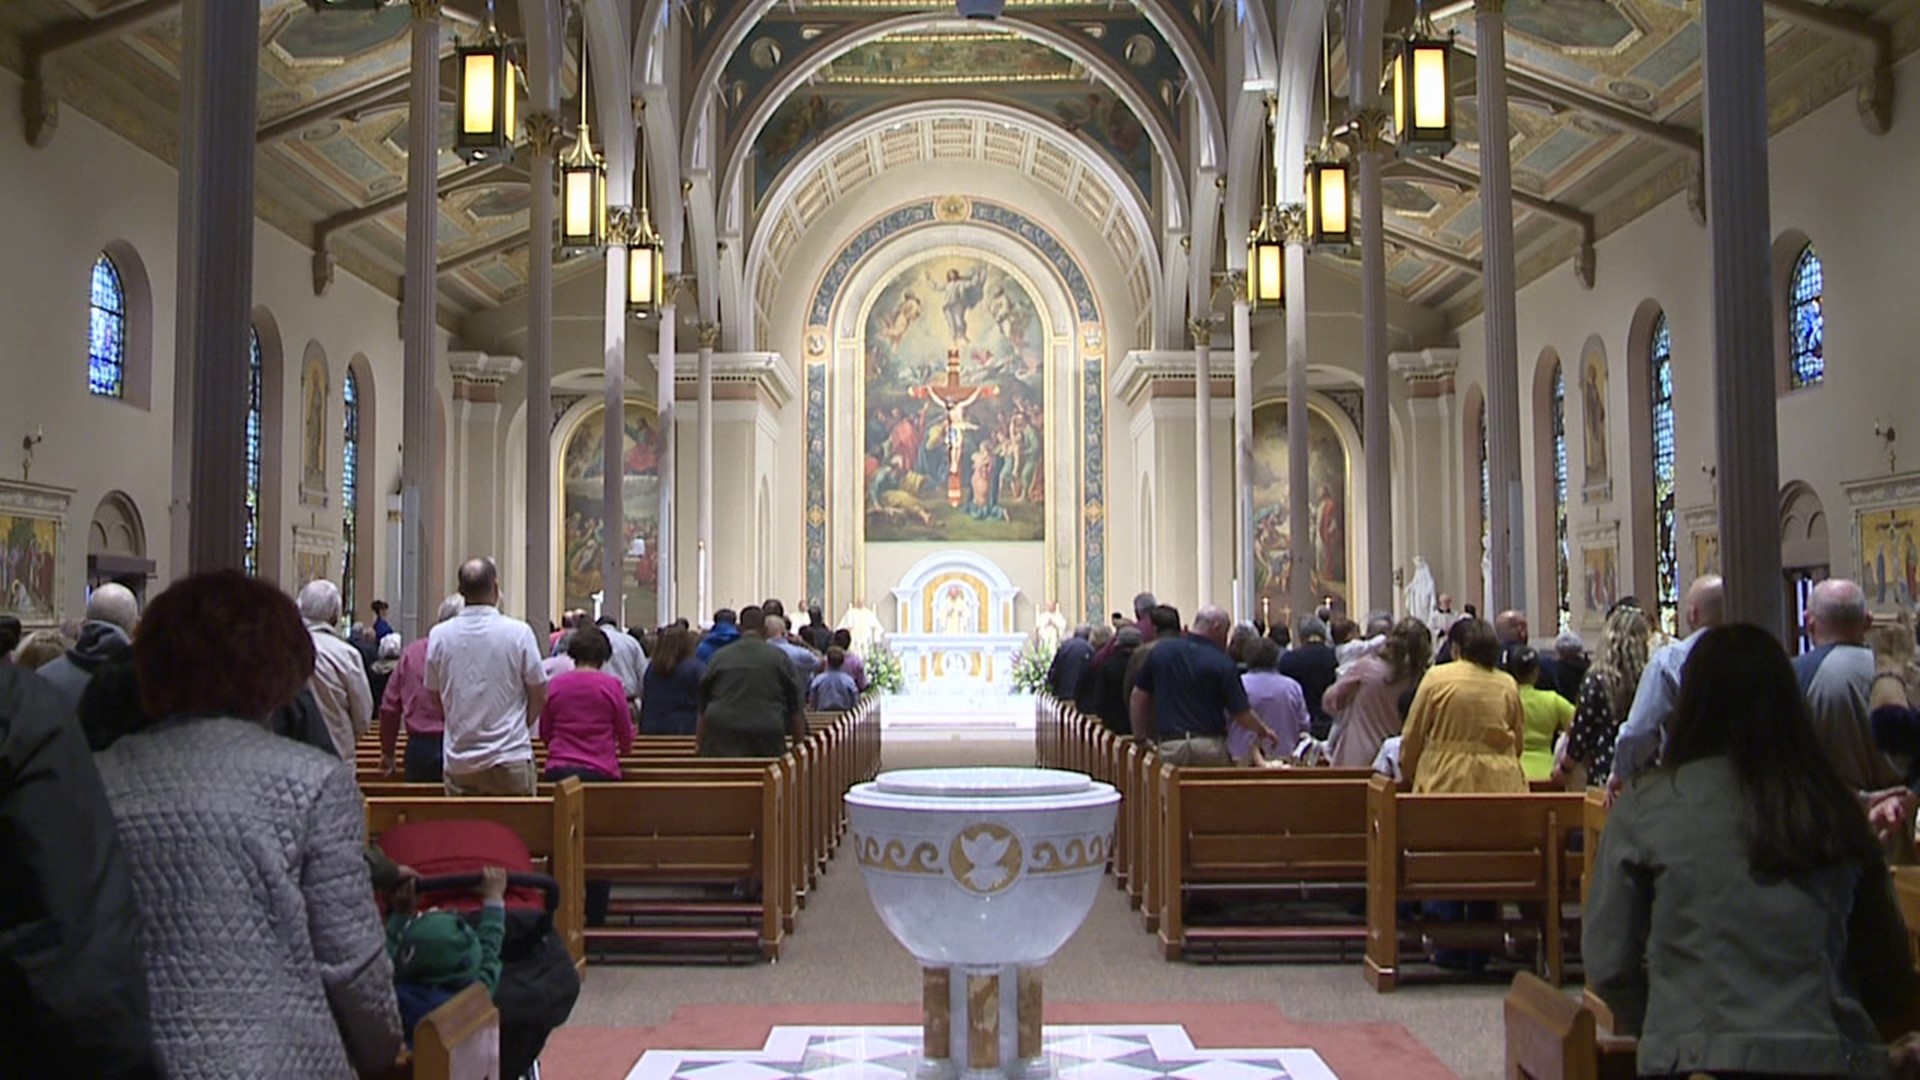 A mass held at St. Peter's Cathedral in Scranton Sunday morning shined a light on foster and adoptive mothers.